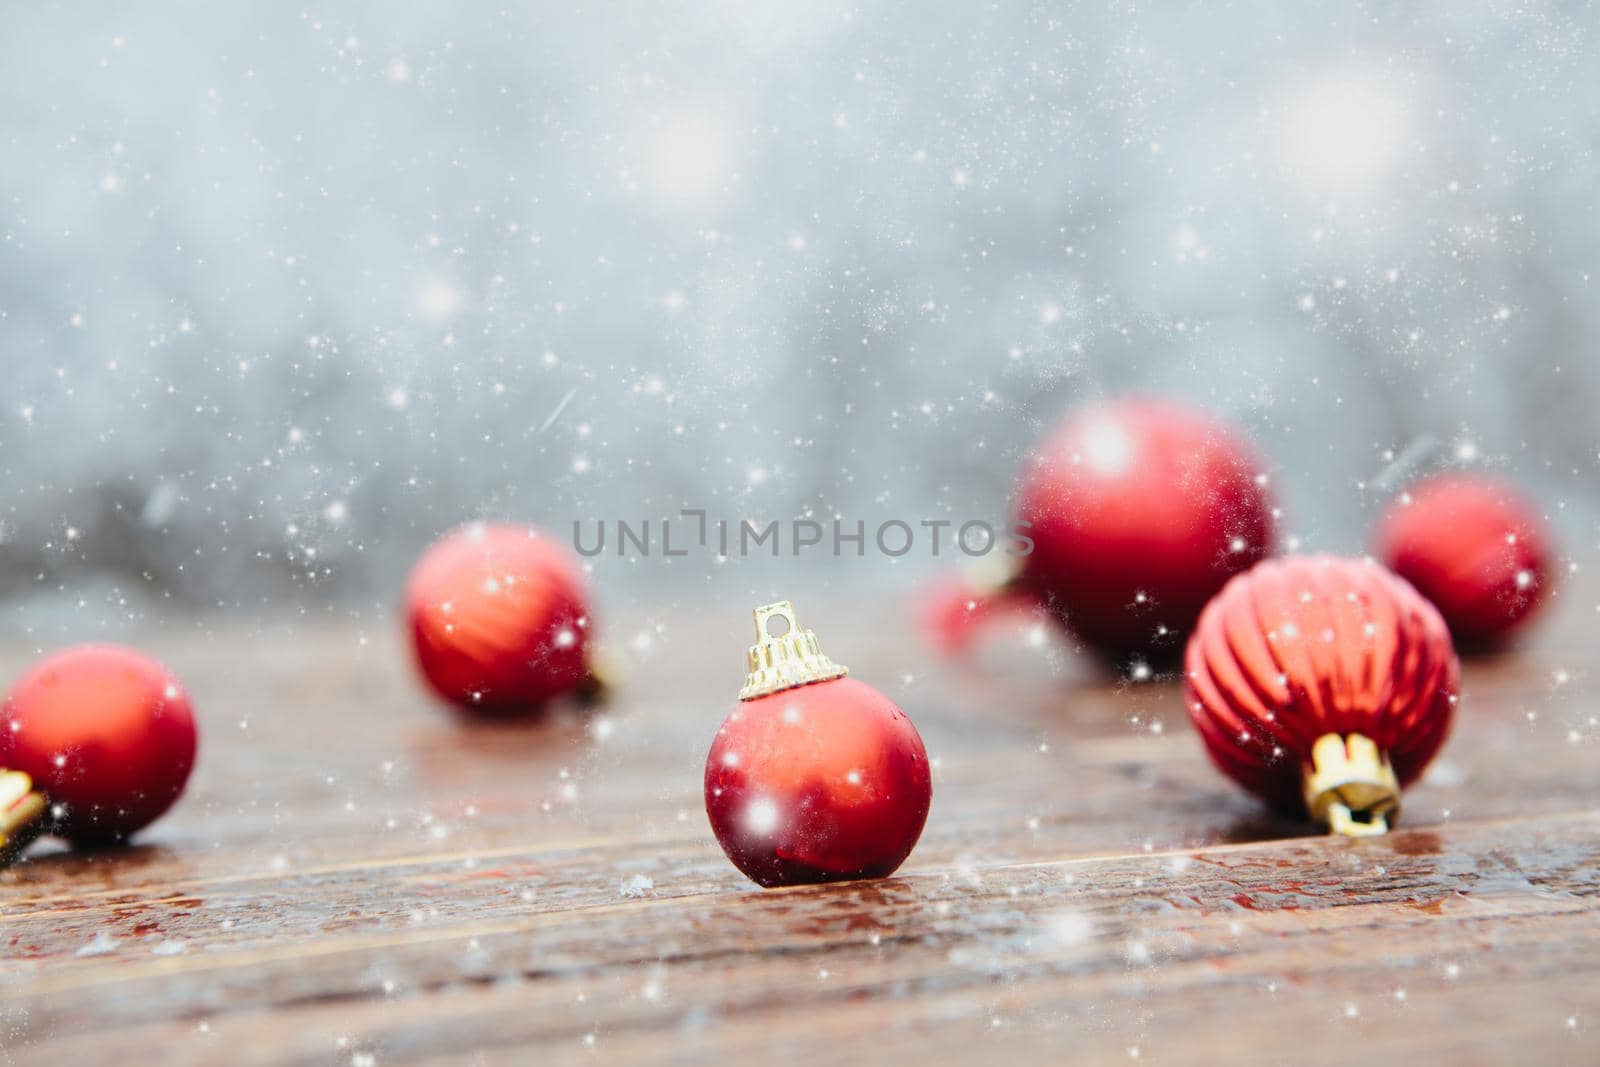 Red balls on board place snow and landscape of tree. Beautiful Christmas bauble decorations lie on the wooden table over snow covered forest background. Atmosphere of magic and fairy tales .